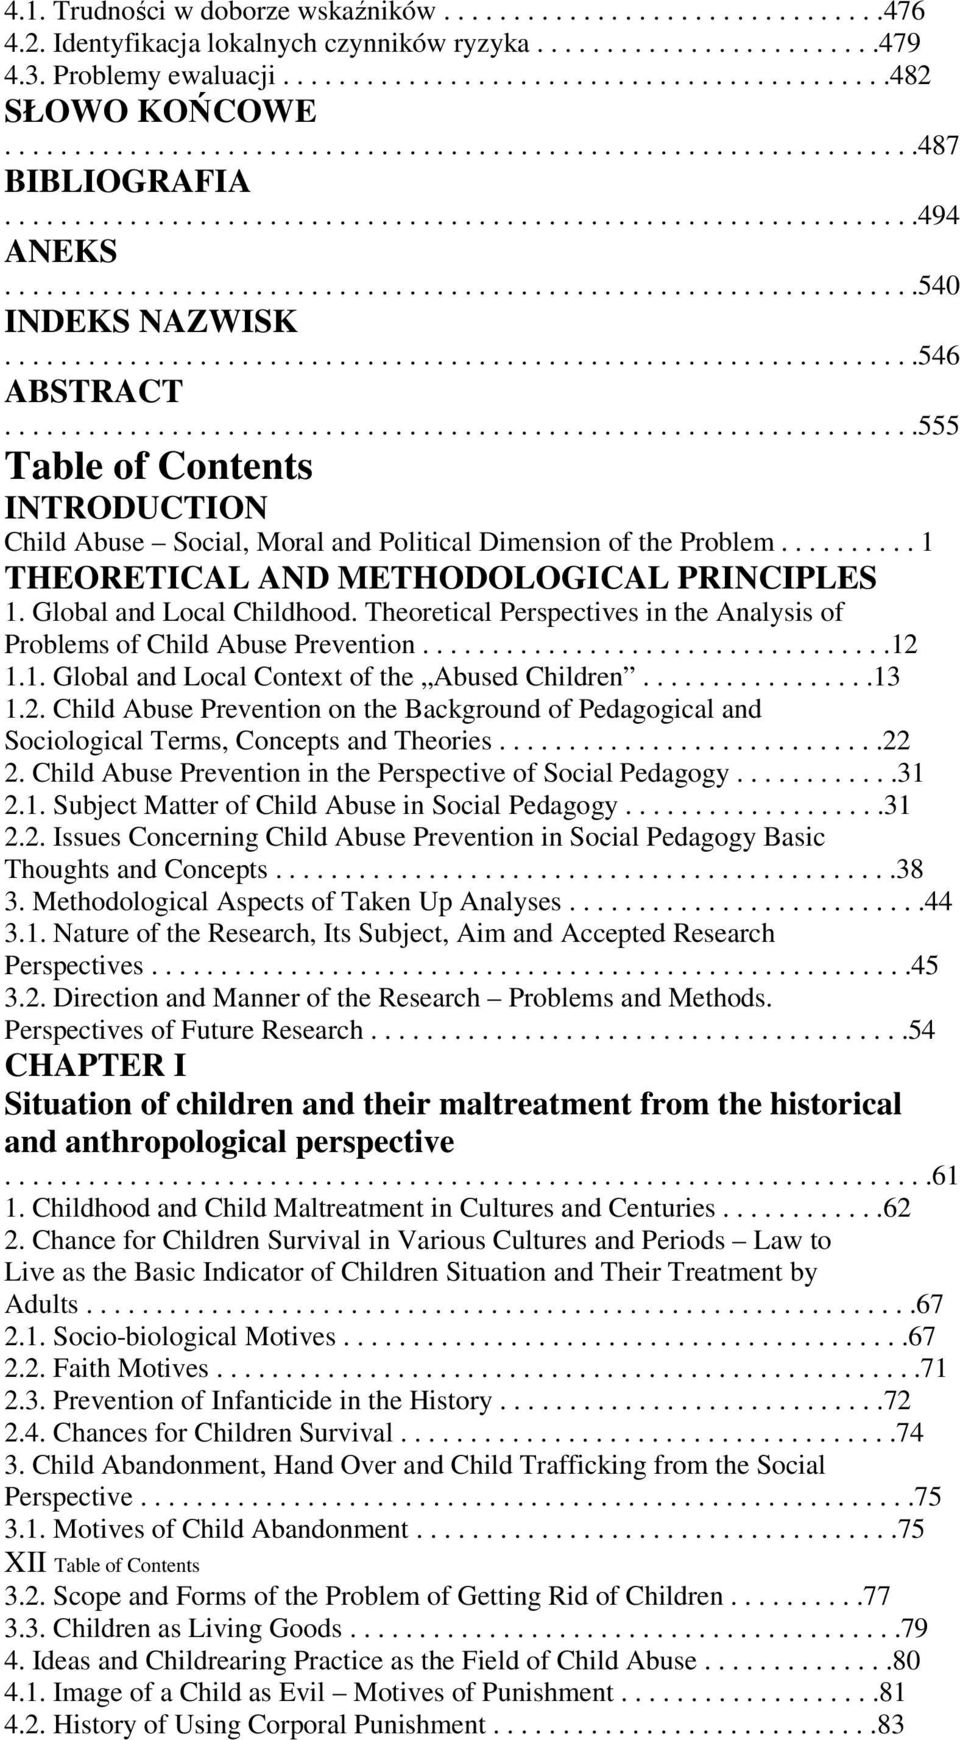 .................................................................546 ABSTRACT..................................................................555 Table of Contents INTRODUCTION Child Abuse Social, Moral and Political Dimension of the Problem.